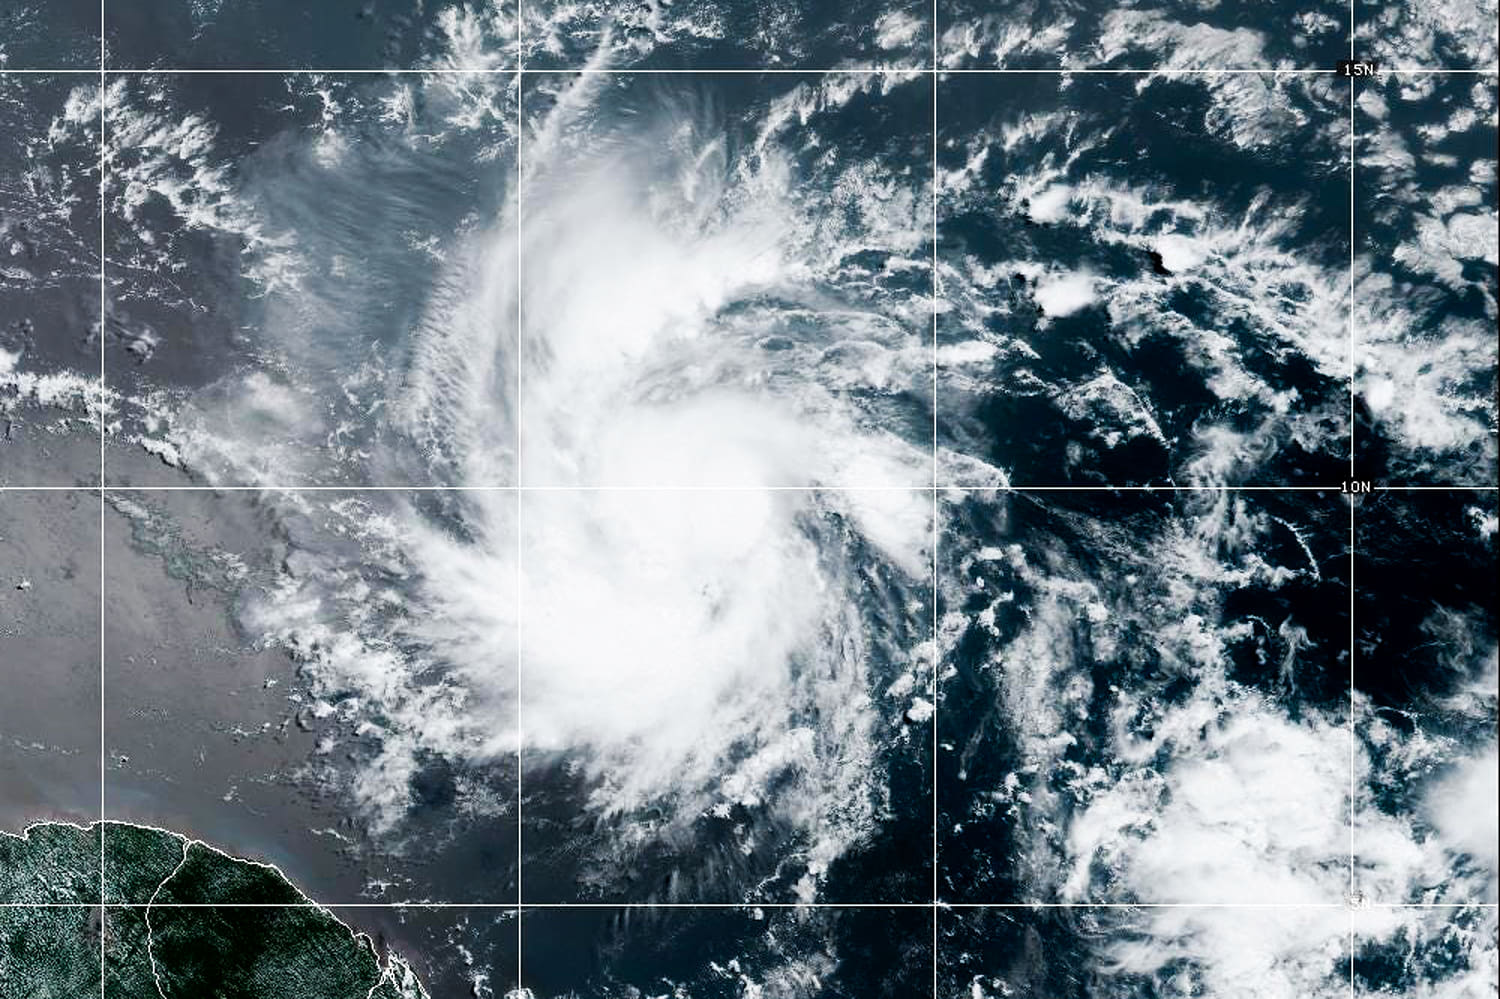 Beryl forecast to become an 'extremely dangerous' Category 4 hurricane